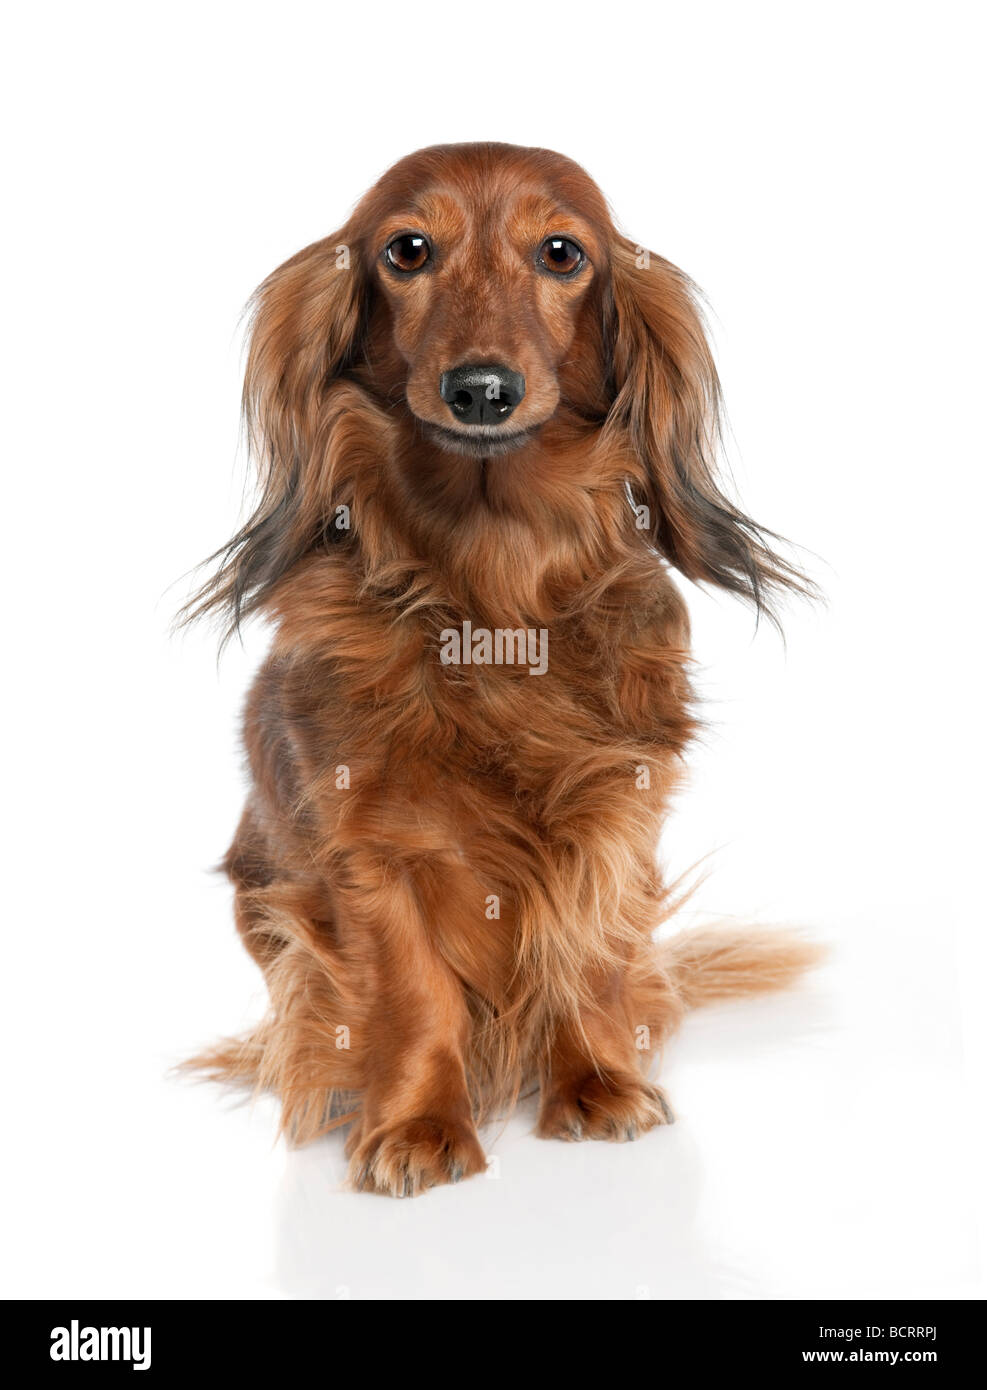 Dachshund, 7 years old, in front of a white background, studio shot Stock Photo